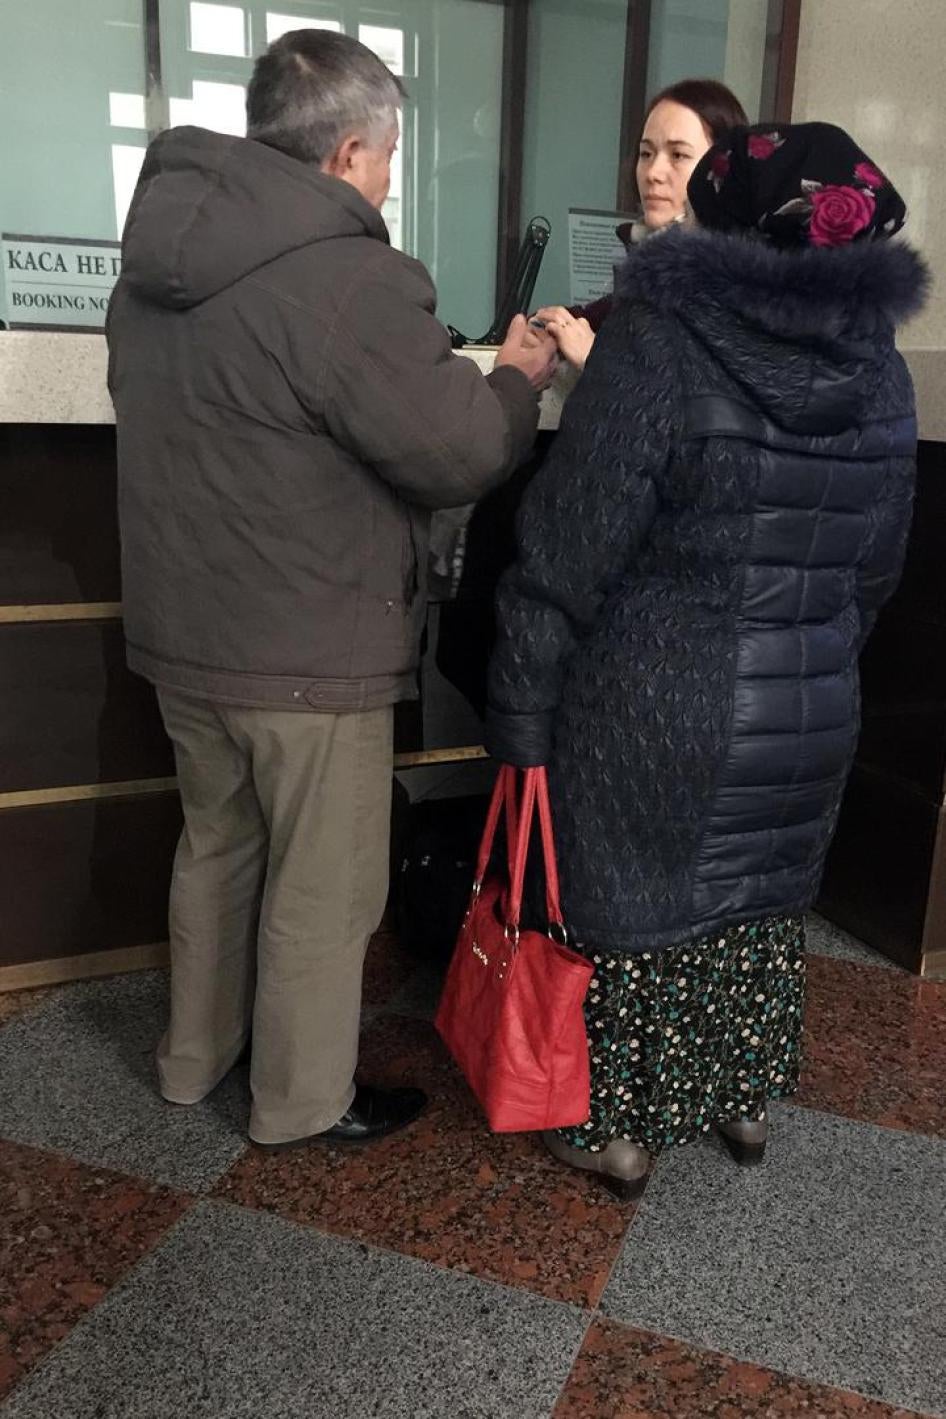 Human Rights Watch researcher interviewing Chechen husband and wife at train station in Brest who were summarily returned from the Polish border after trying to apply for asylum. Brest, Belarus, December 7, 2016. 